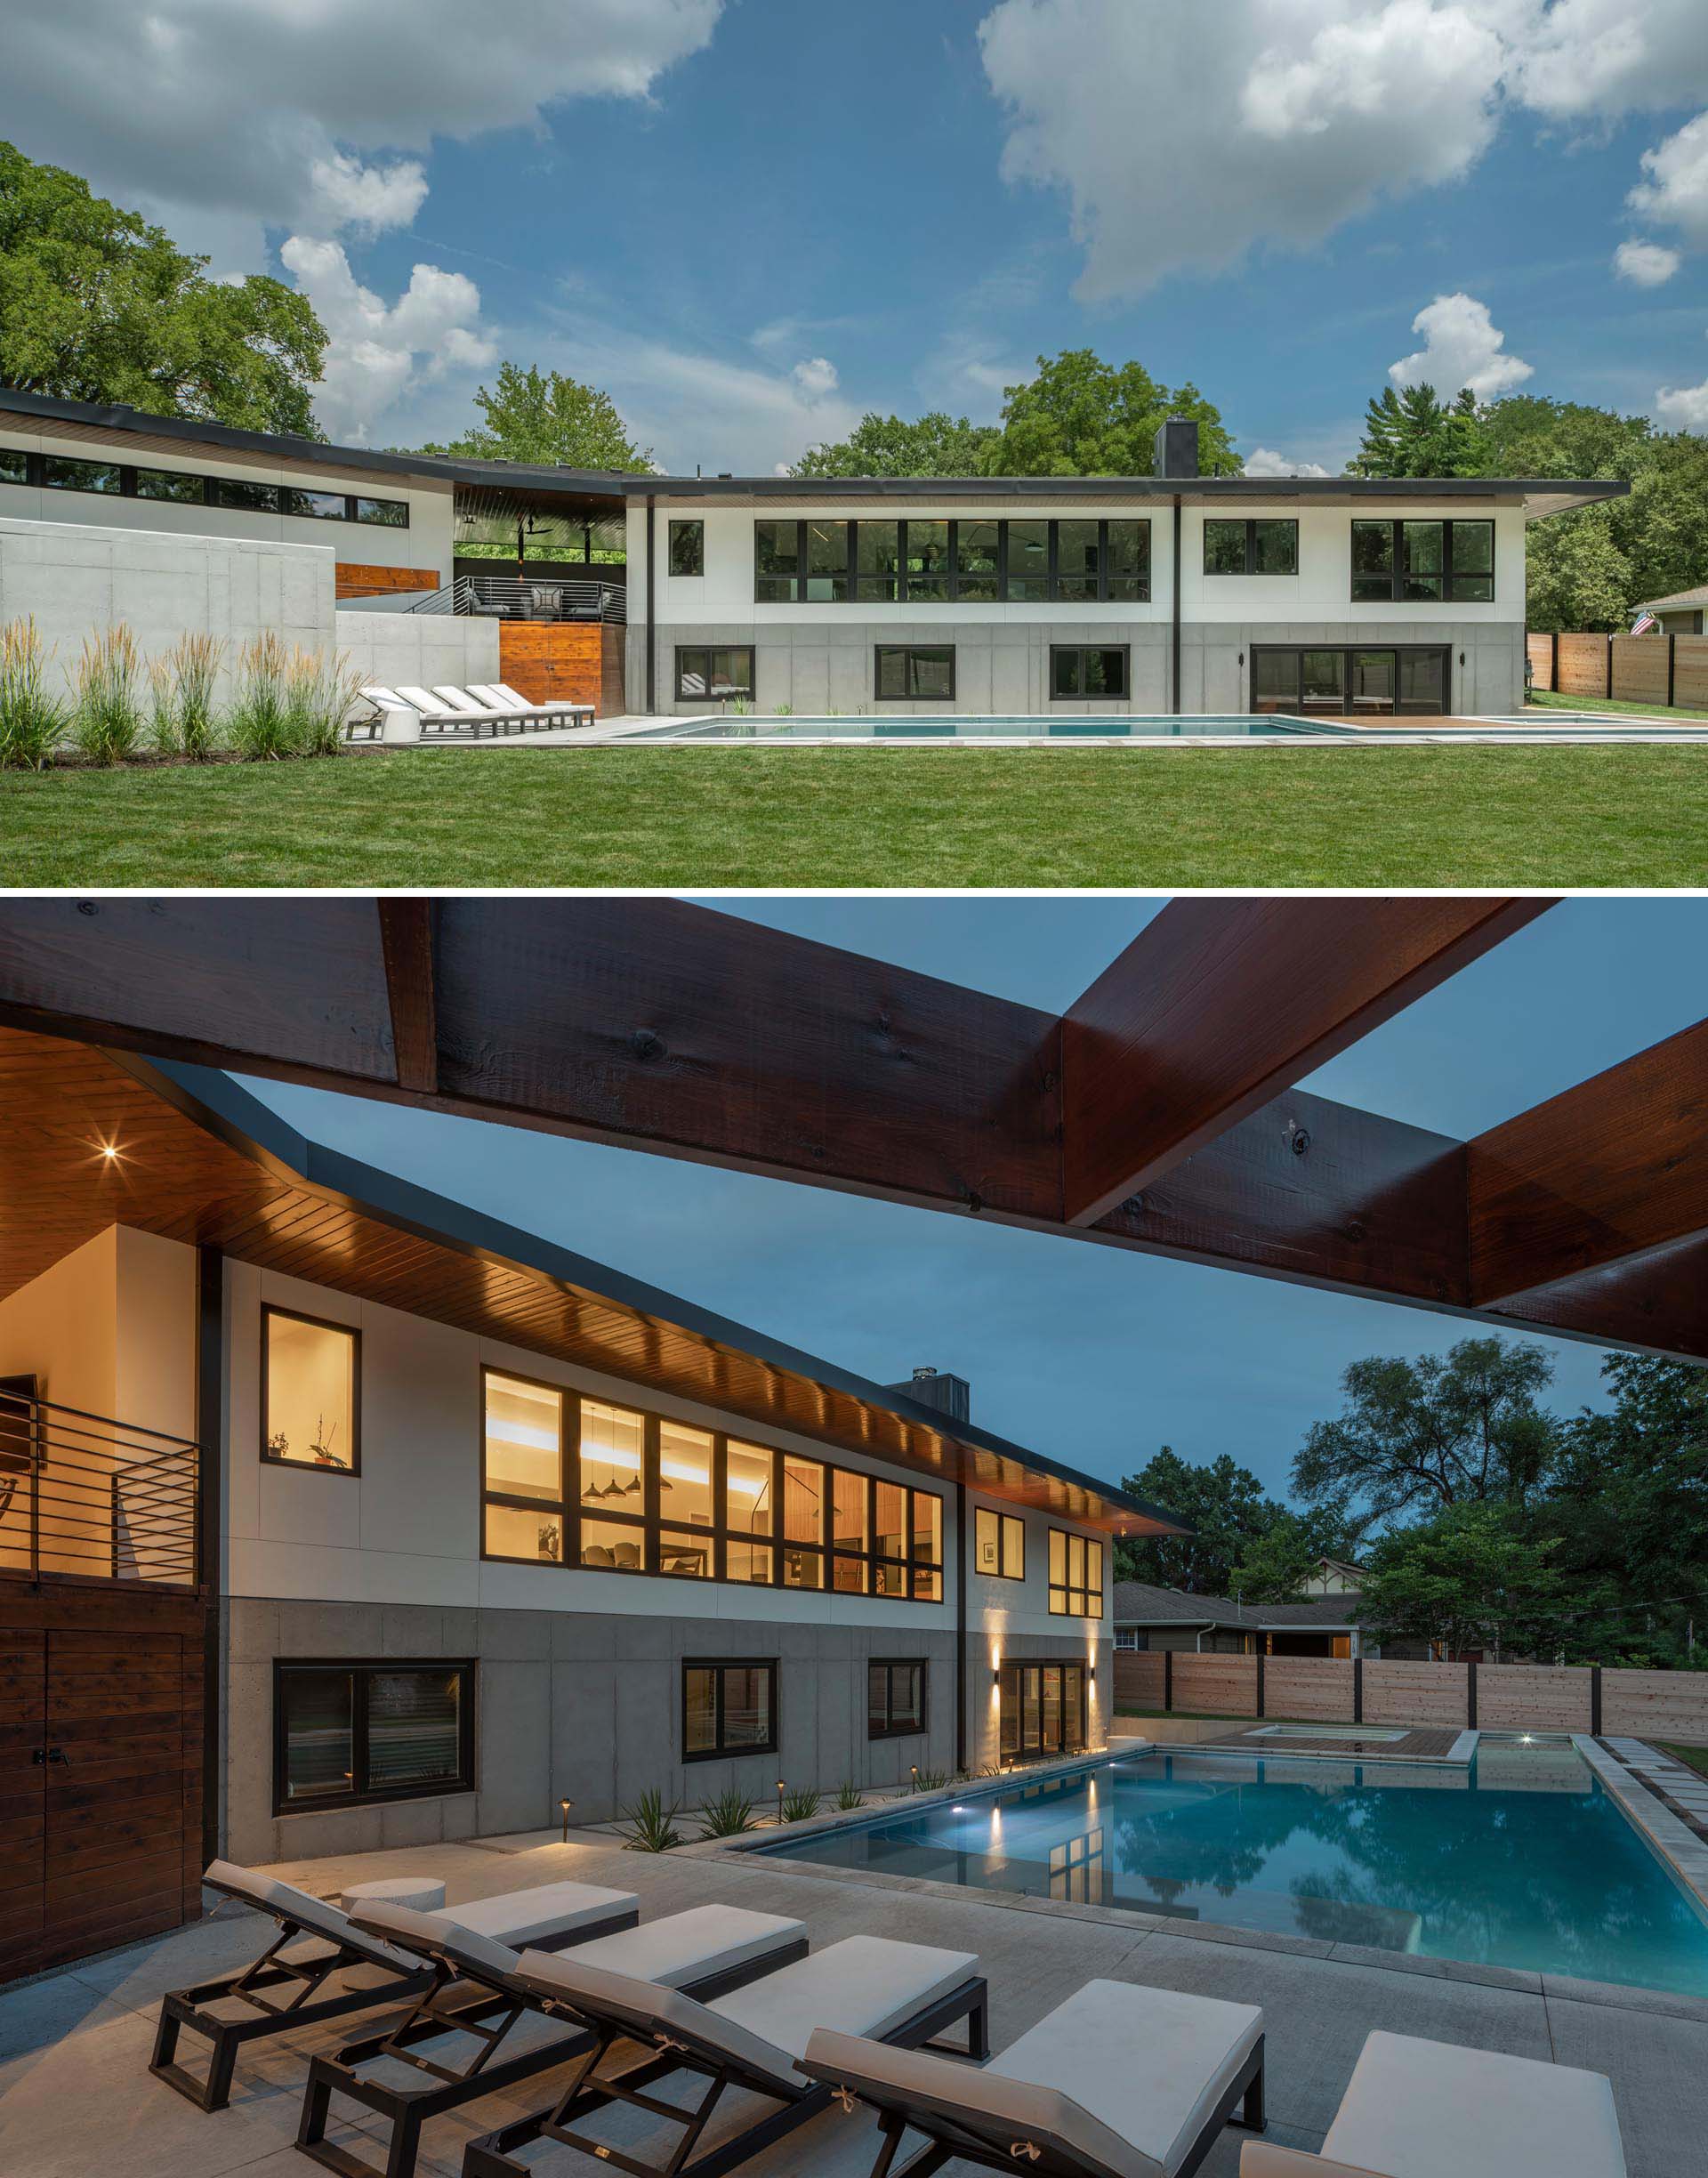 A mid-century modern inspired home with large landscaped yard, a swimming pool with a hot tub, a pool house, outdoor shower, and a deck.